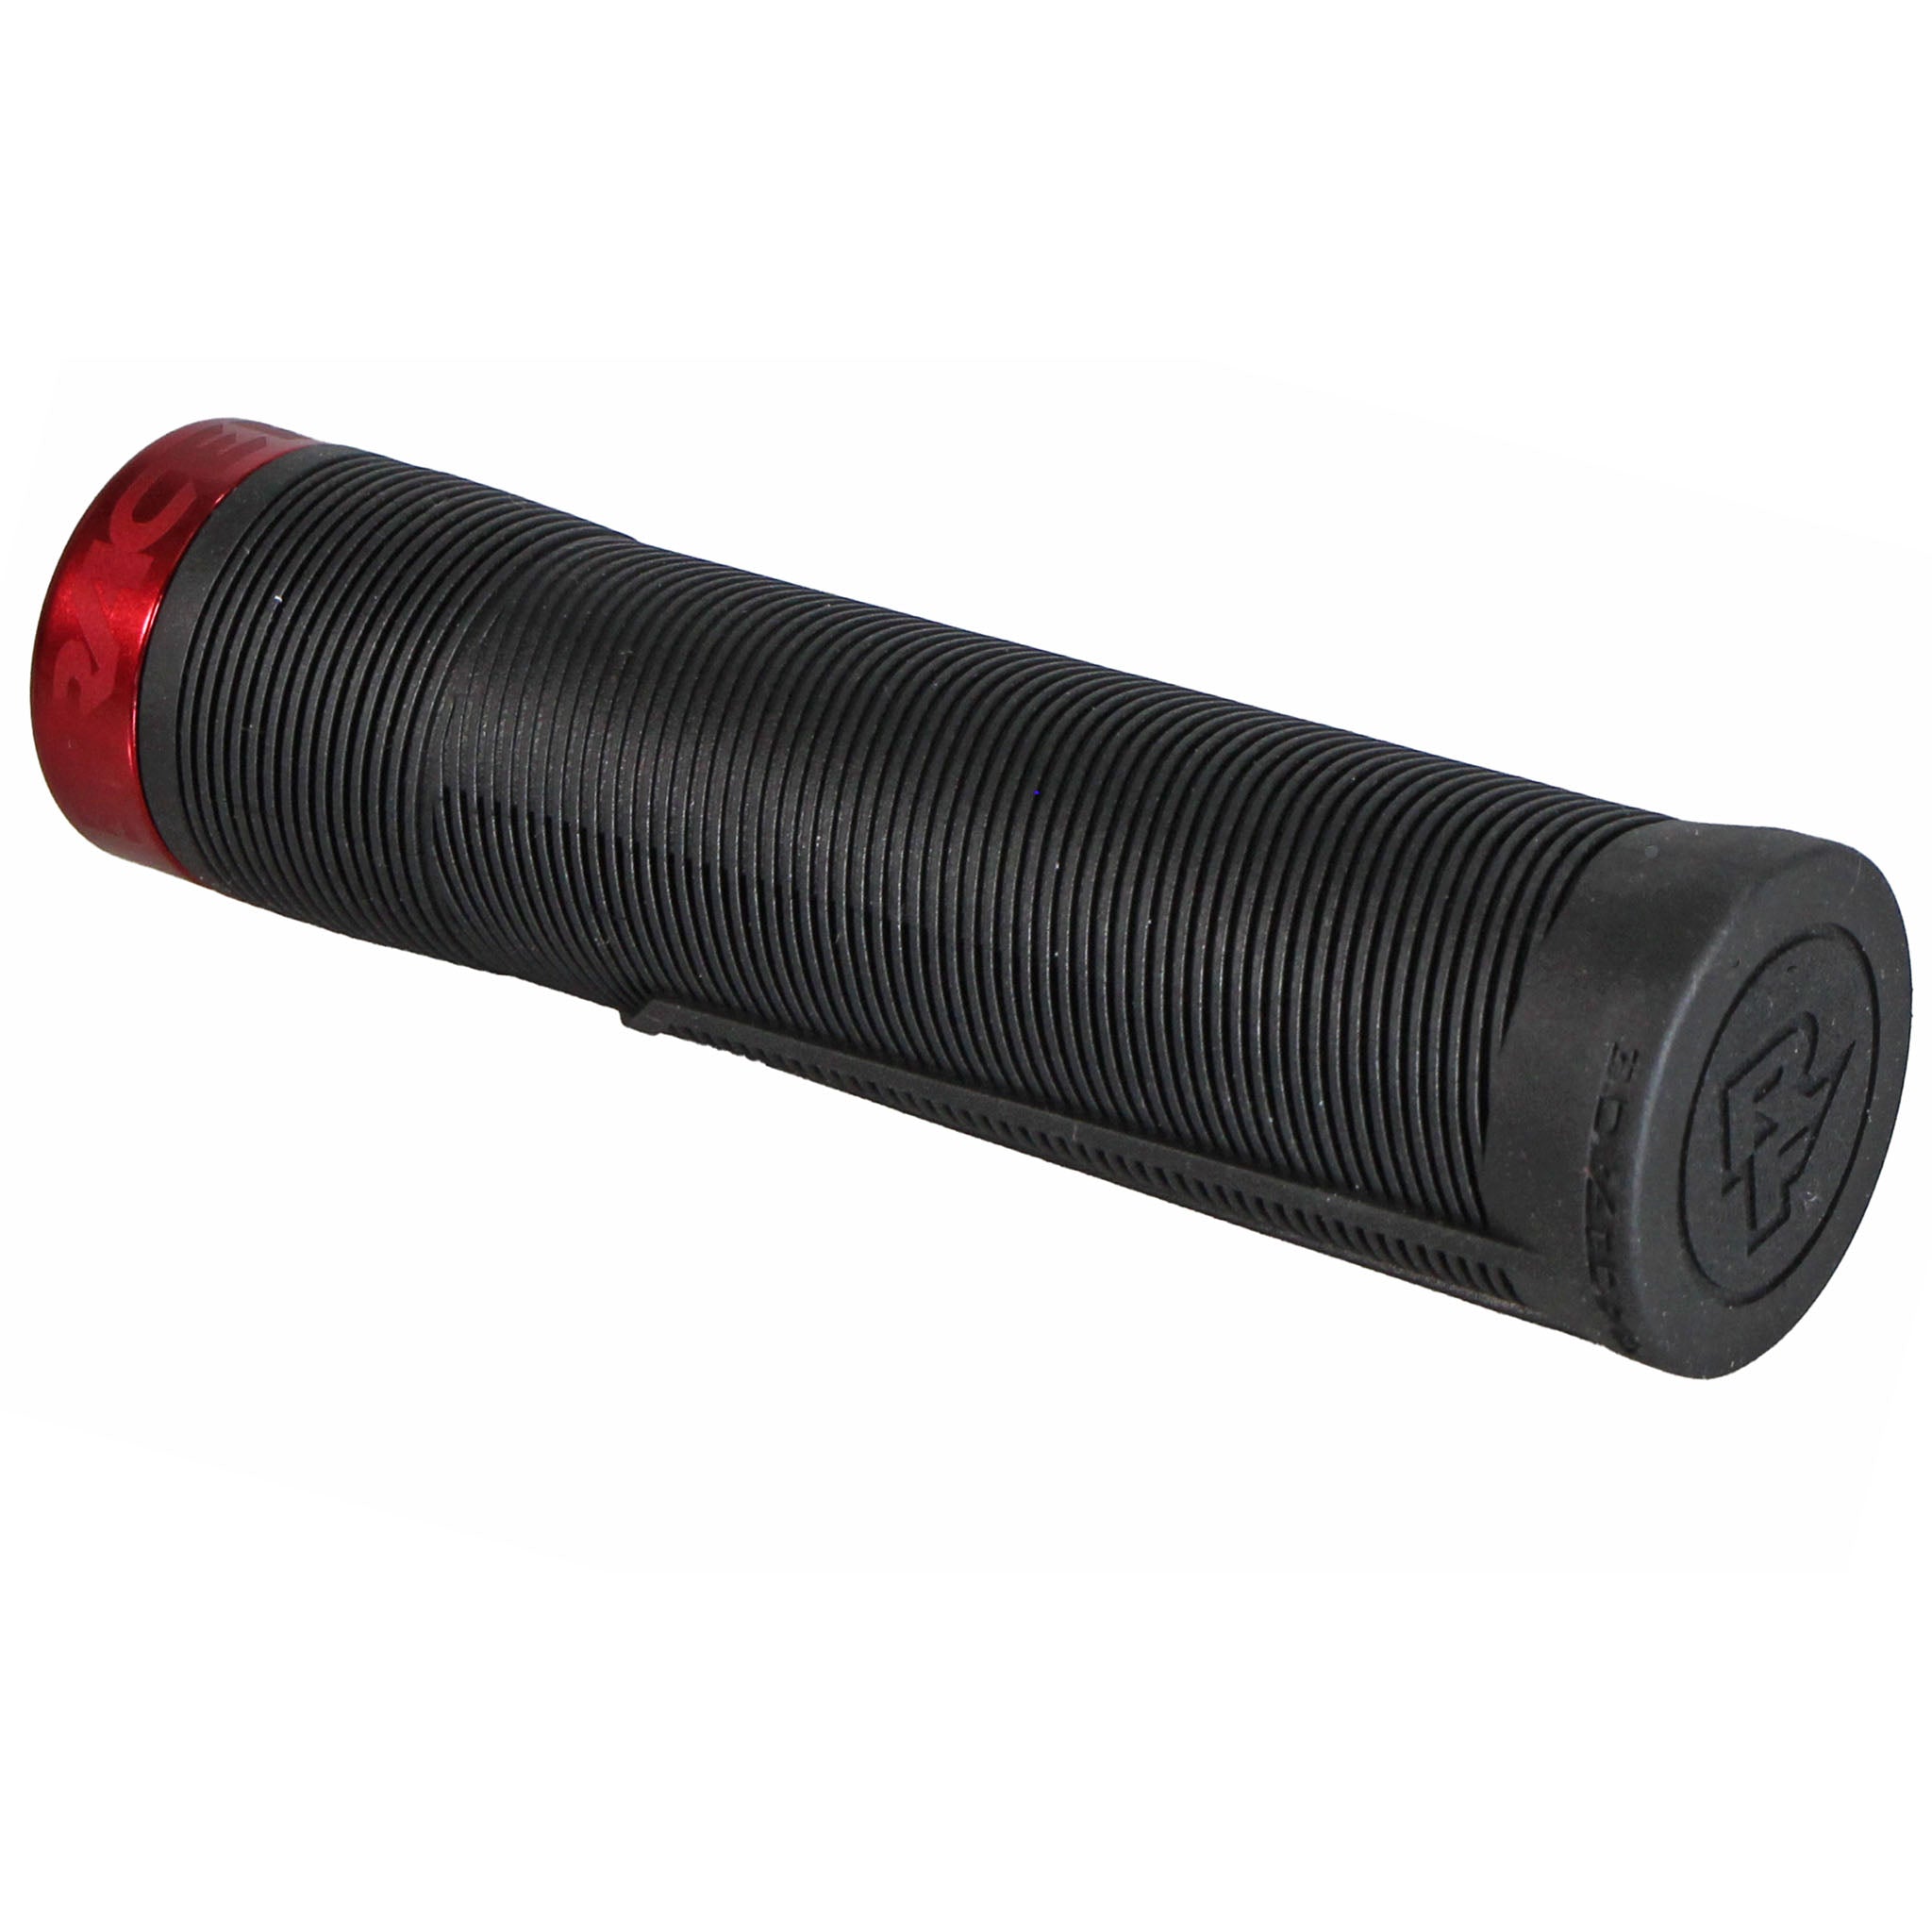 RaceFace Chester Grips - Lock-On Black/Red 34mm